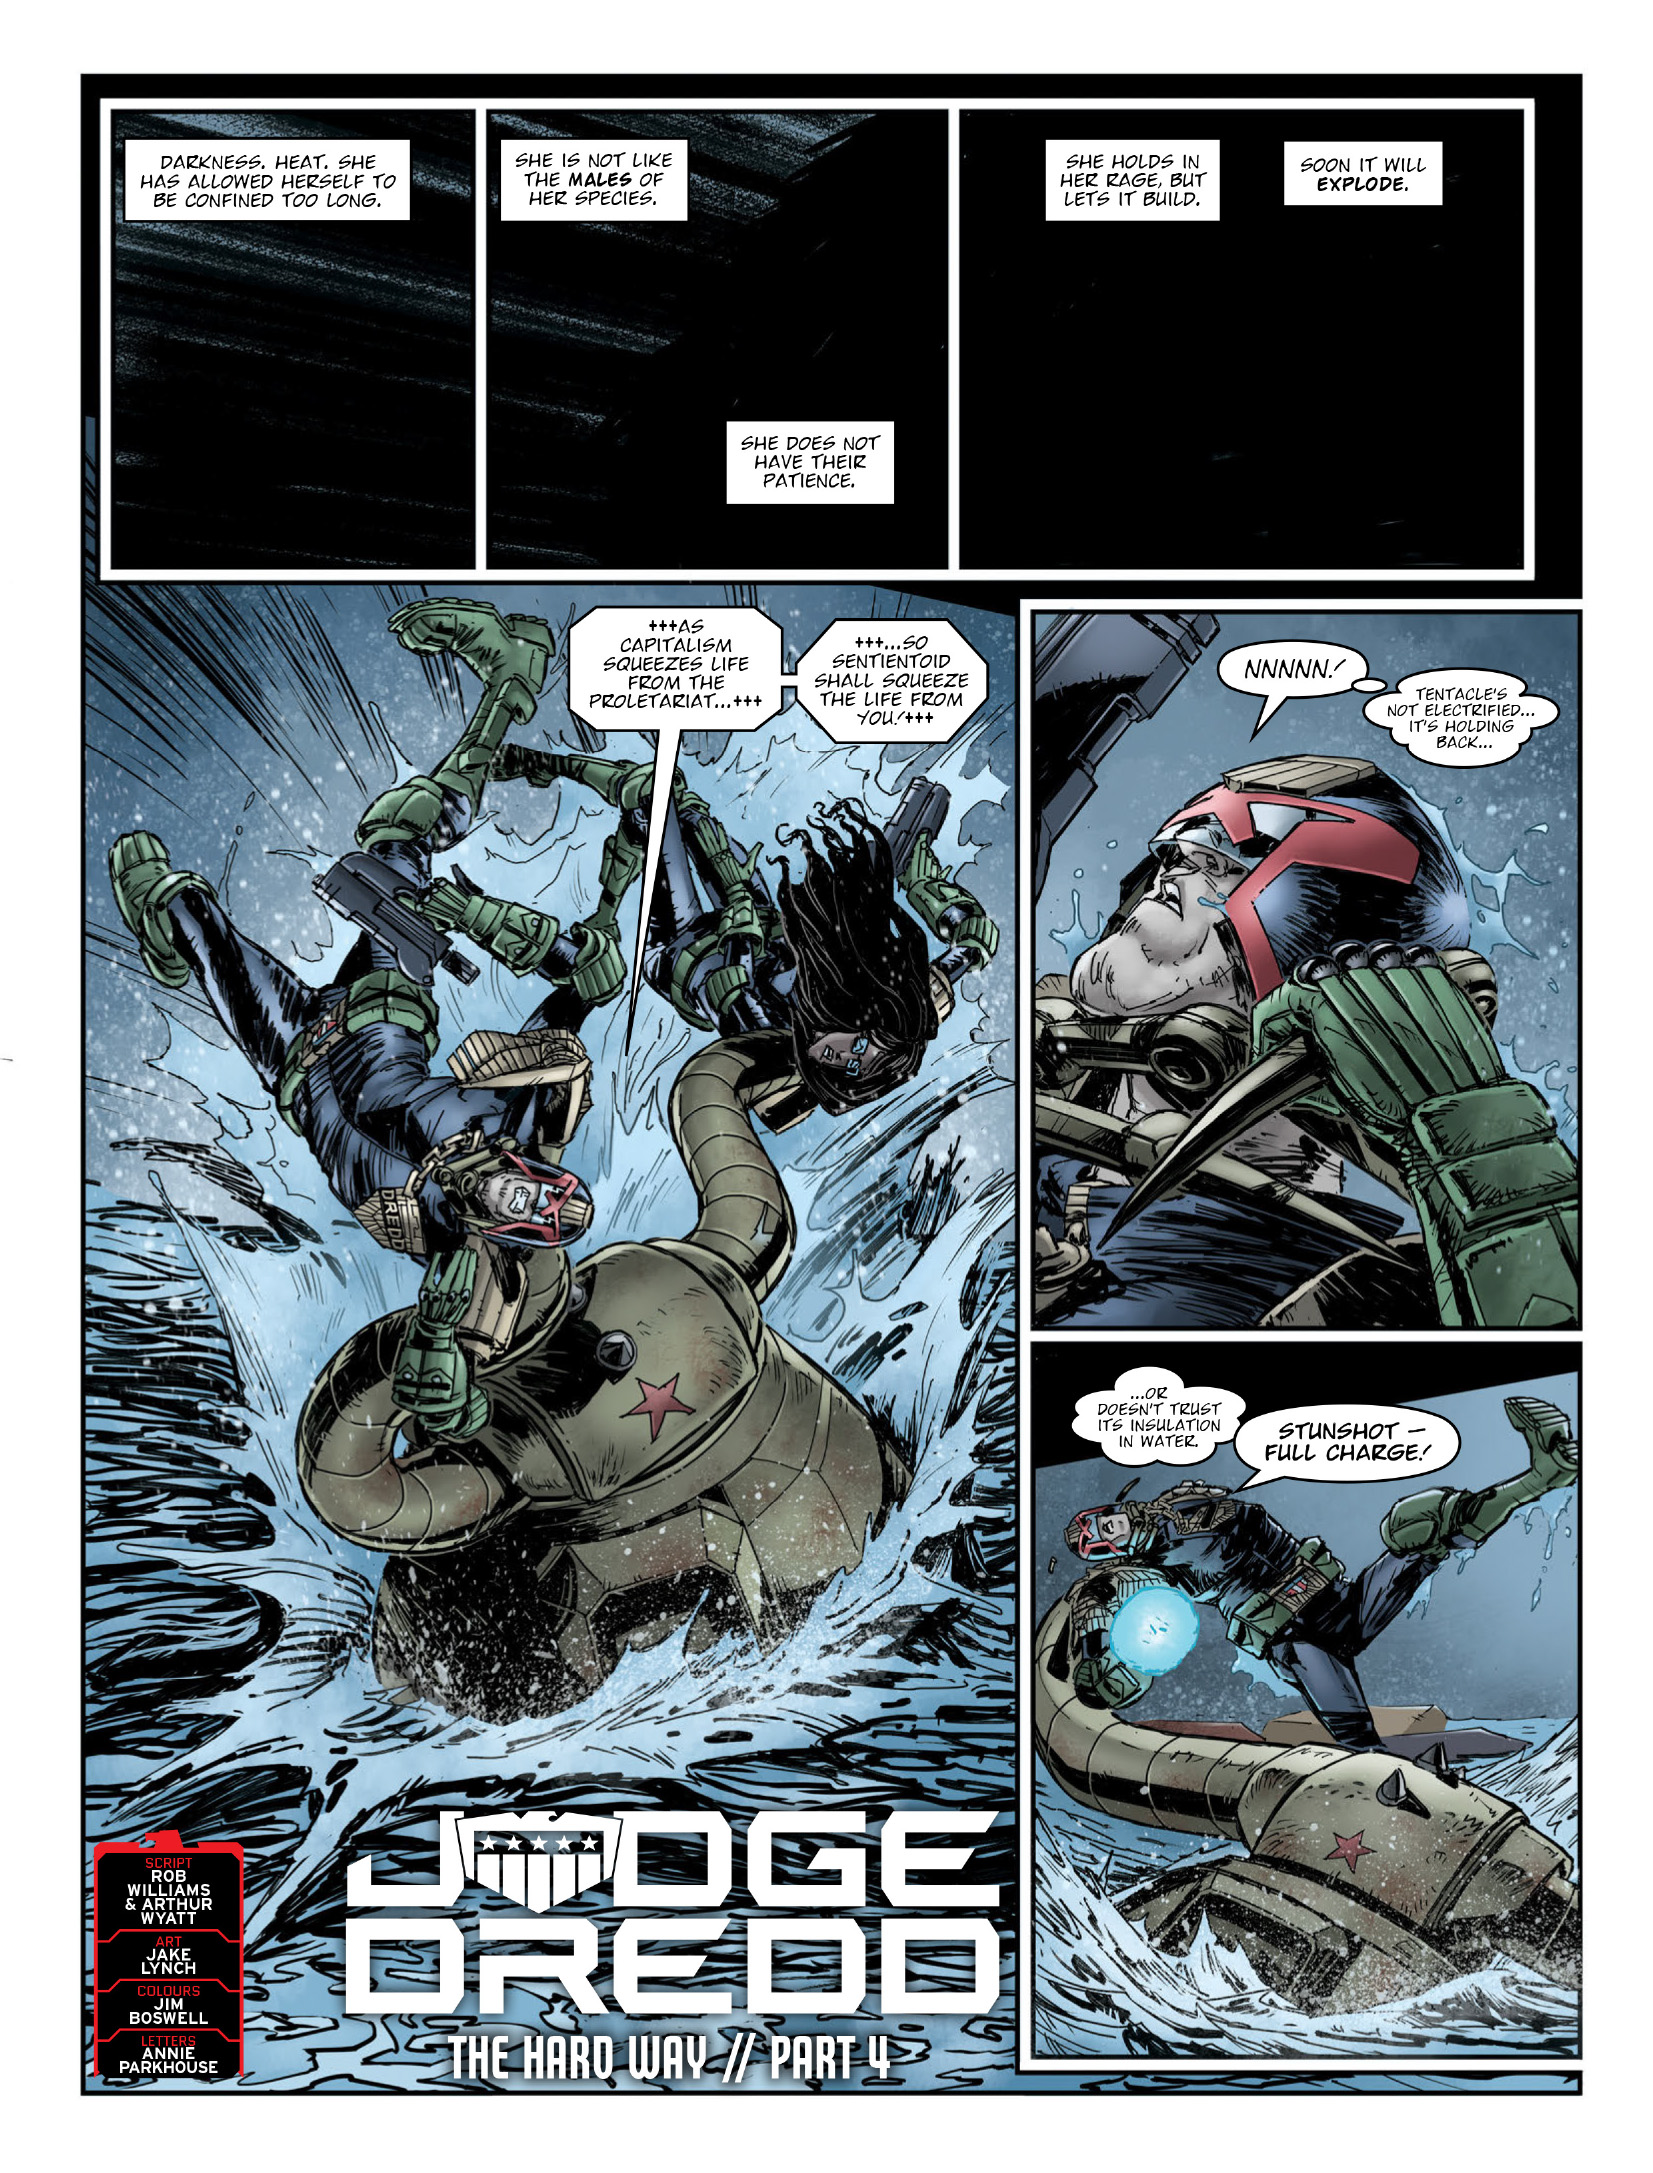 2000 AD: Chapter 2253 - Page 3